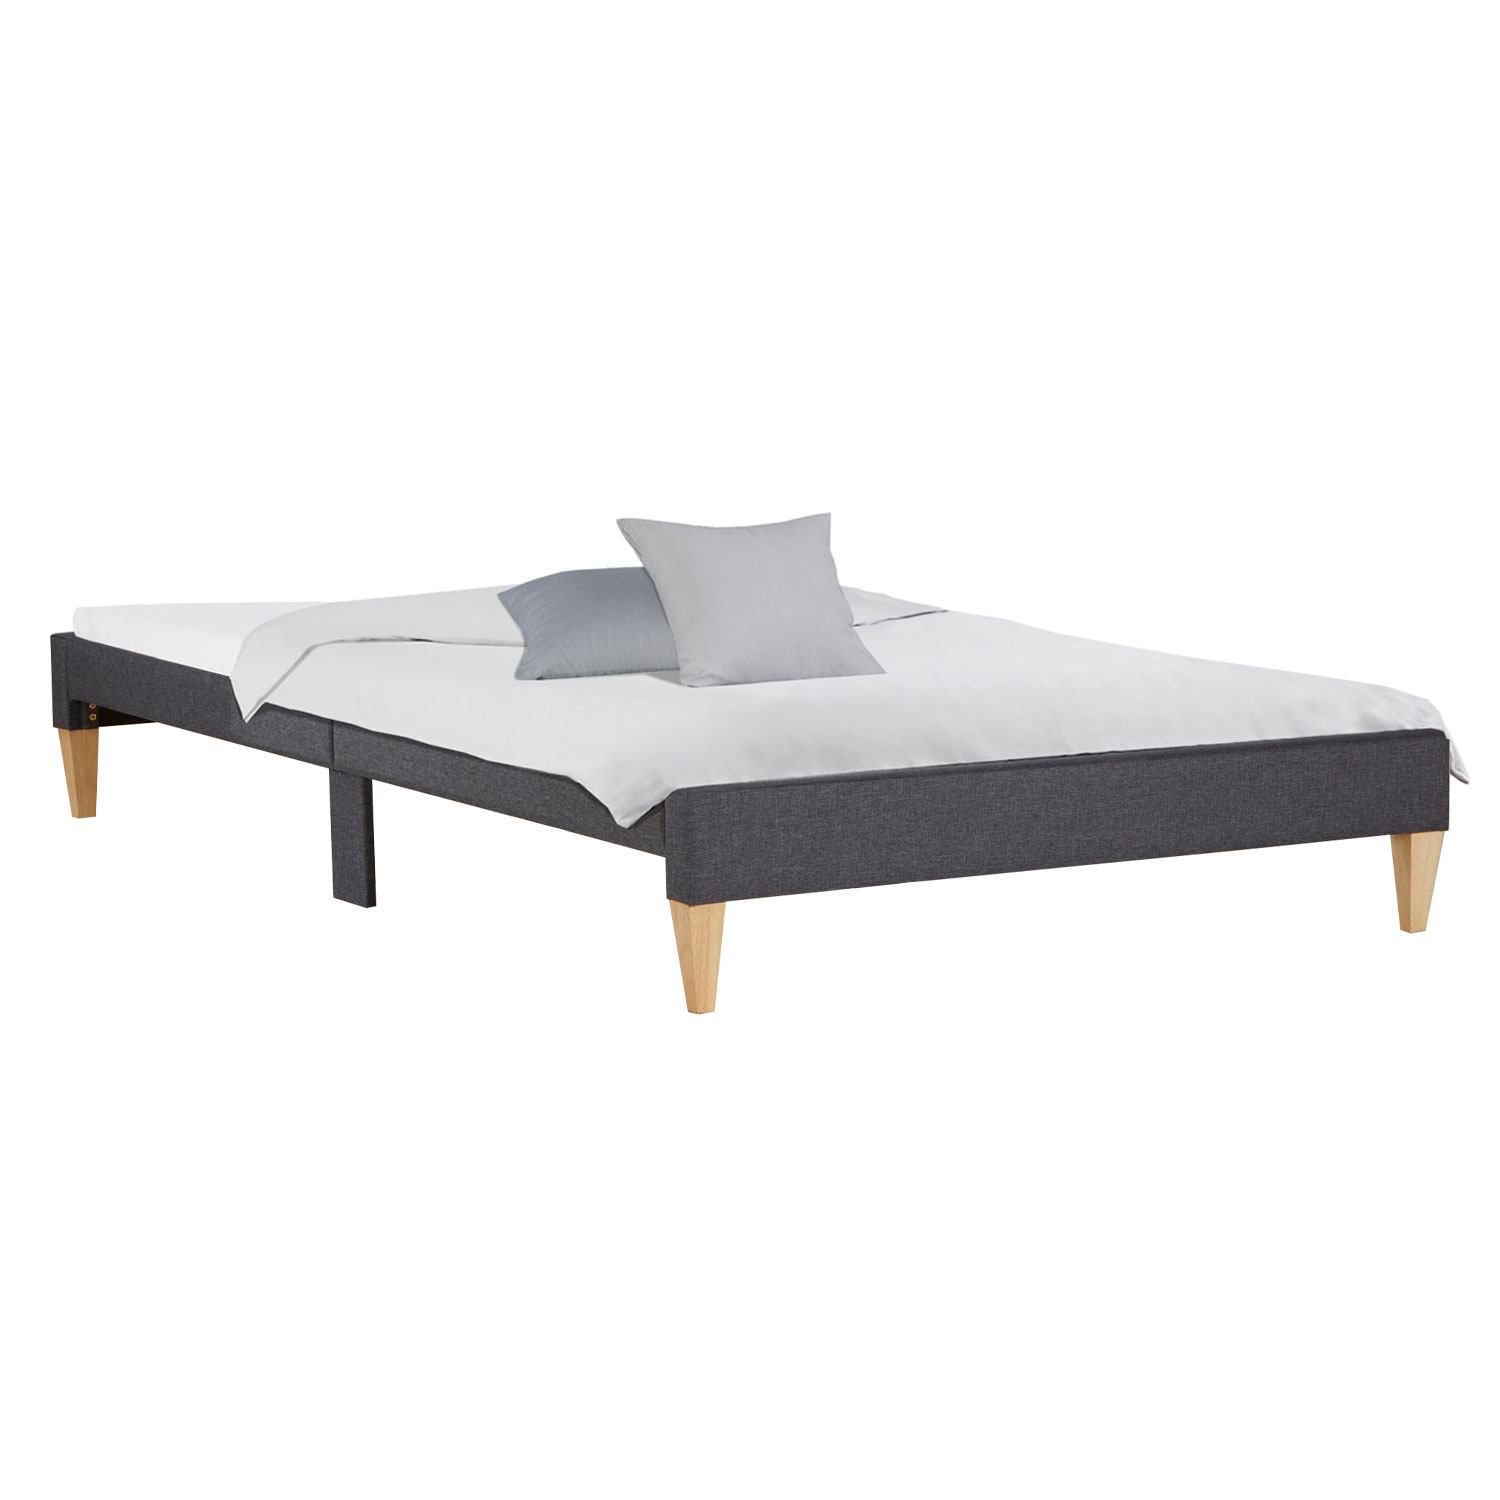 Upholstered Bed 90 140 x200 cm Slatts Grey Fabric Bed Single Bed Double Bed Futon Bed Frame Platform Bed Mattress 2 Drawers